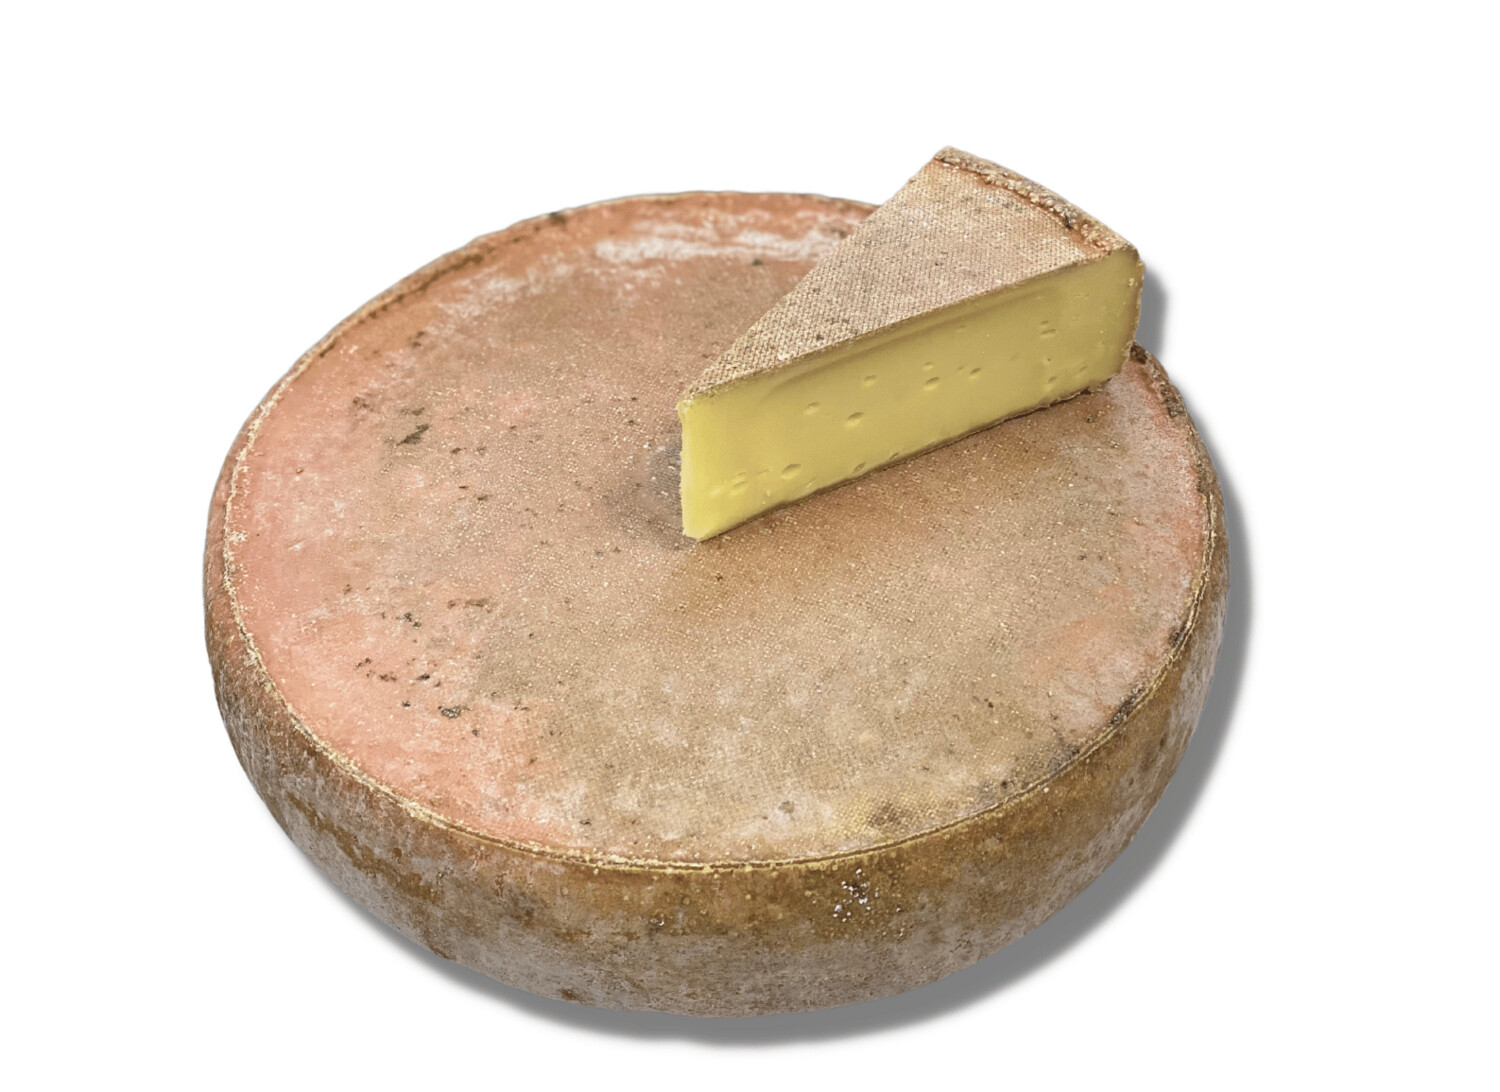 Fromage à Raclette - Vieux Fromages